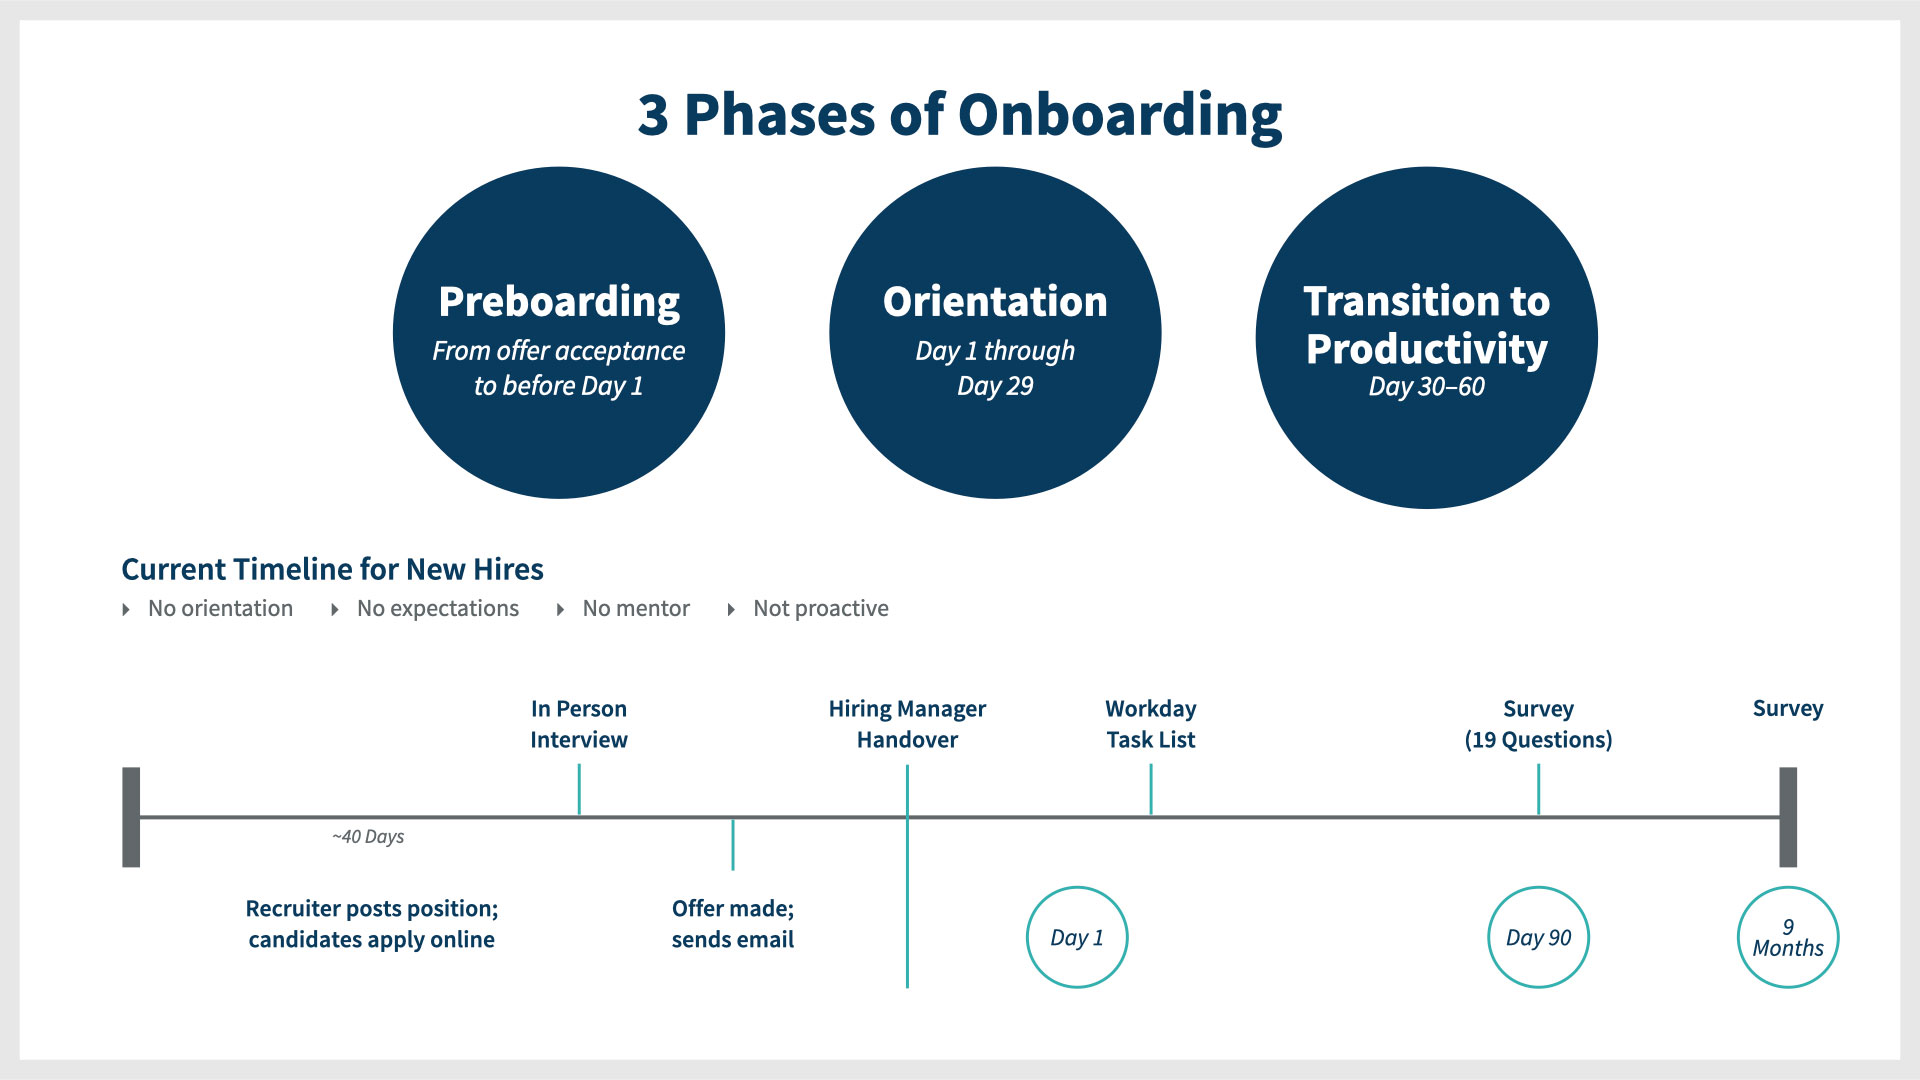 3 Phases of Onboarding Timeline